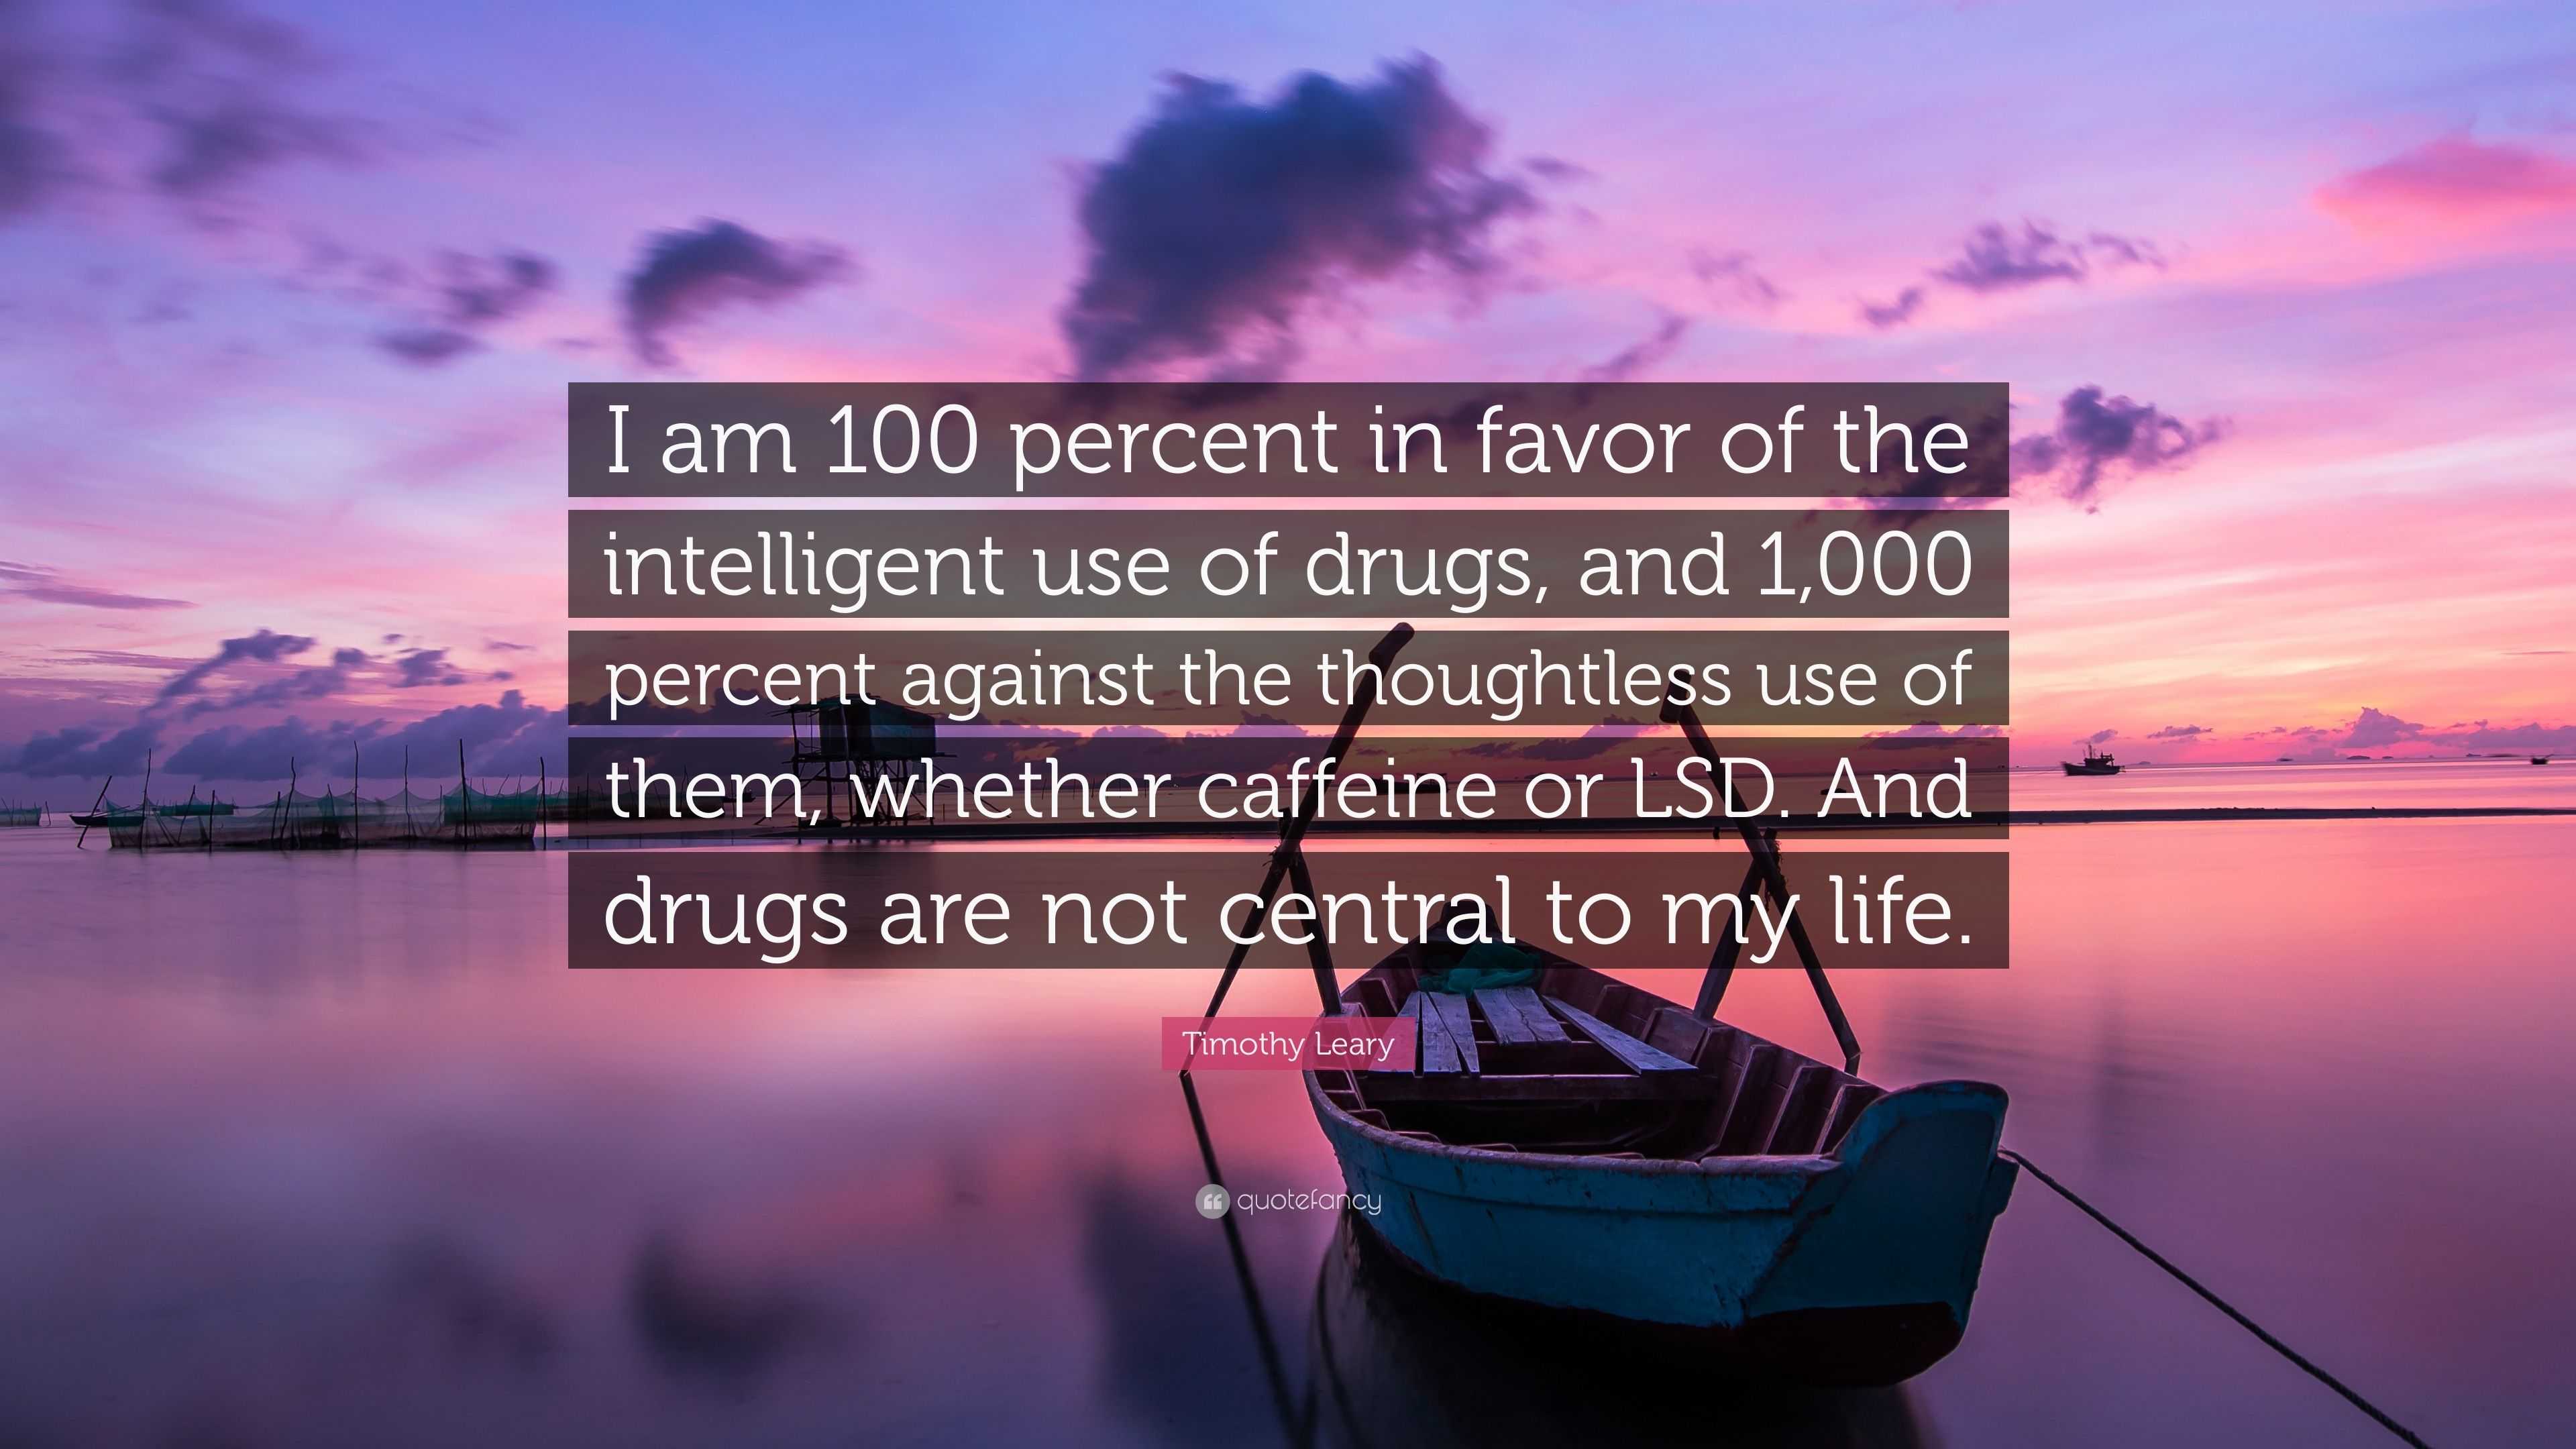 timothy-leary-quote-i-am-100-percent-in-favor-of-the-intelligent-use-of-drugs-and-1-000